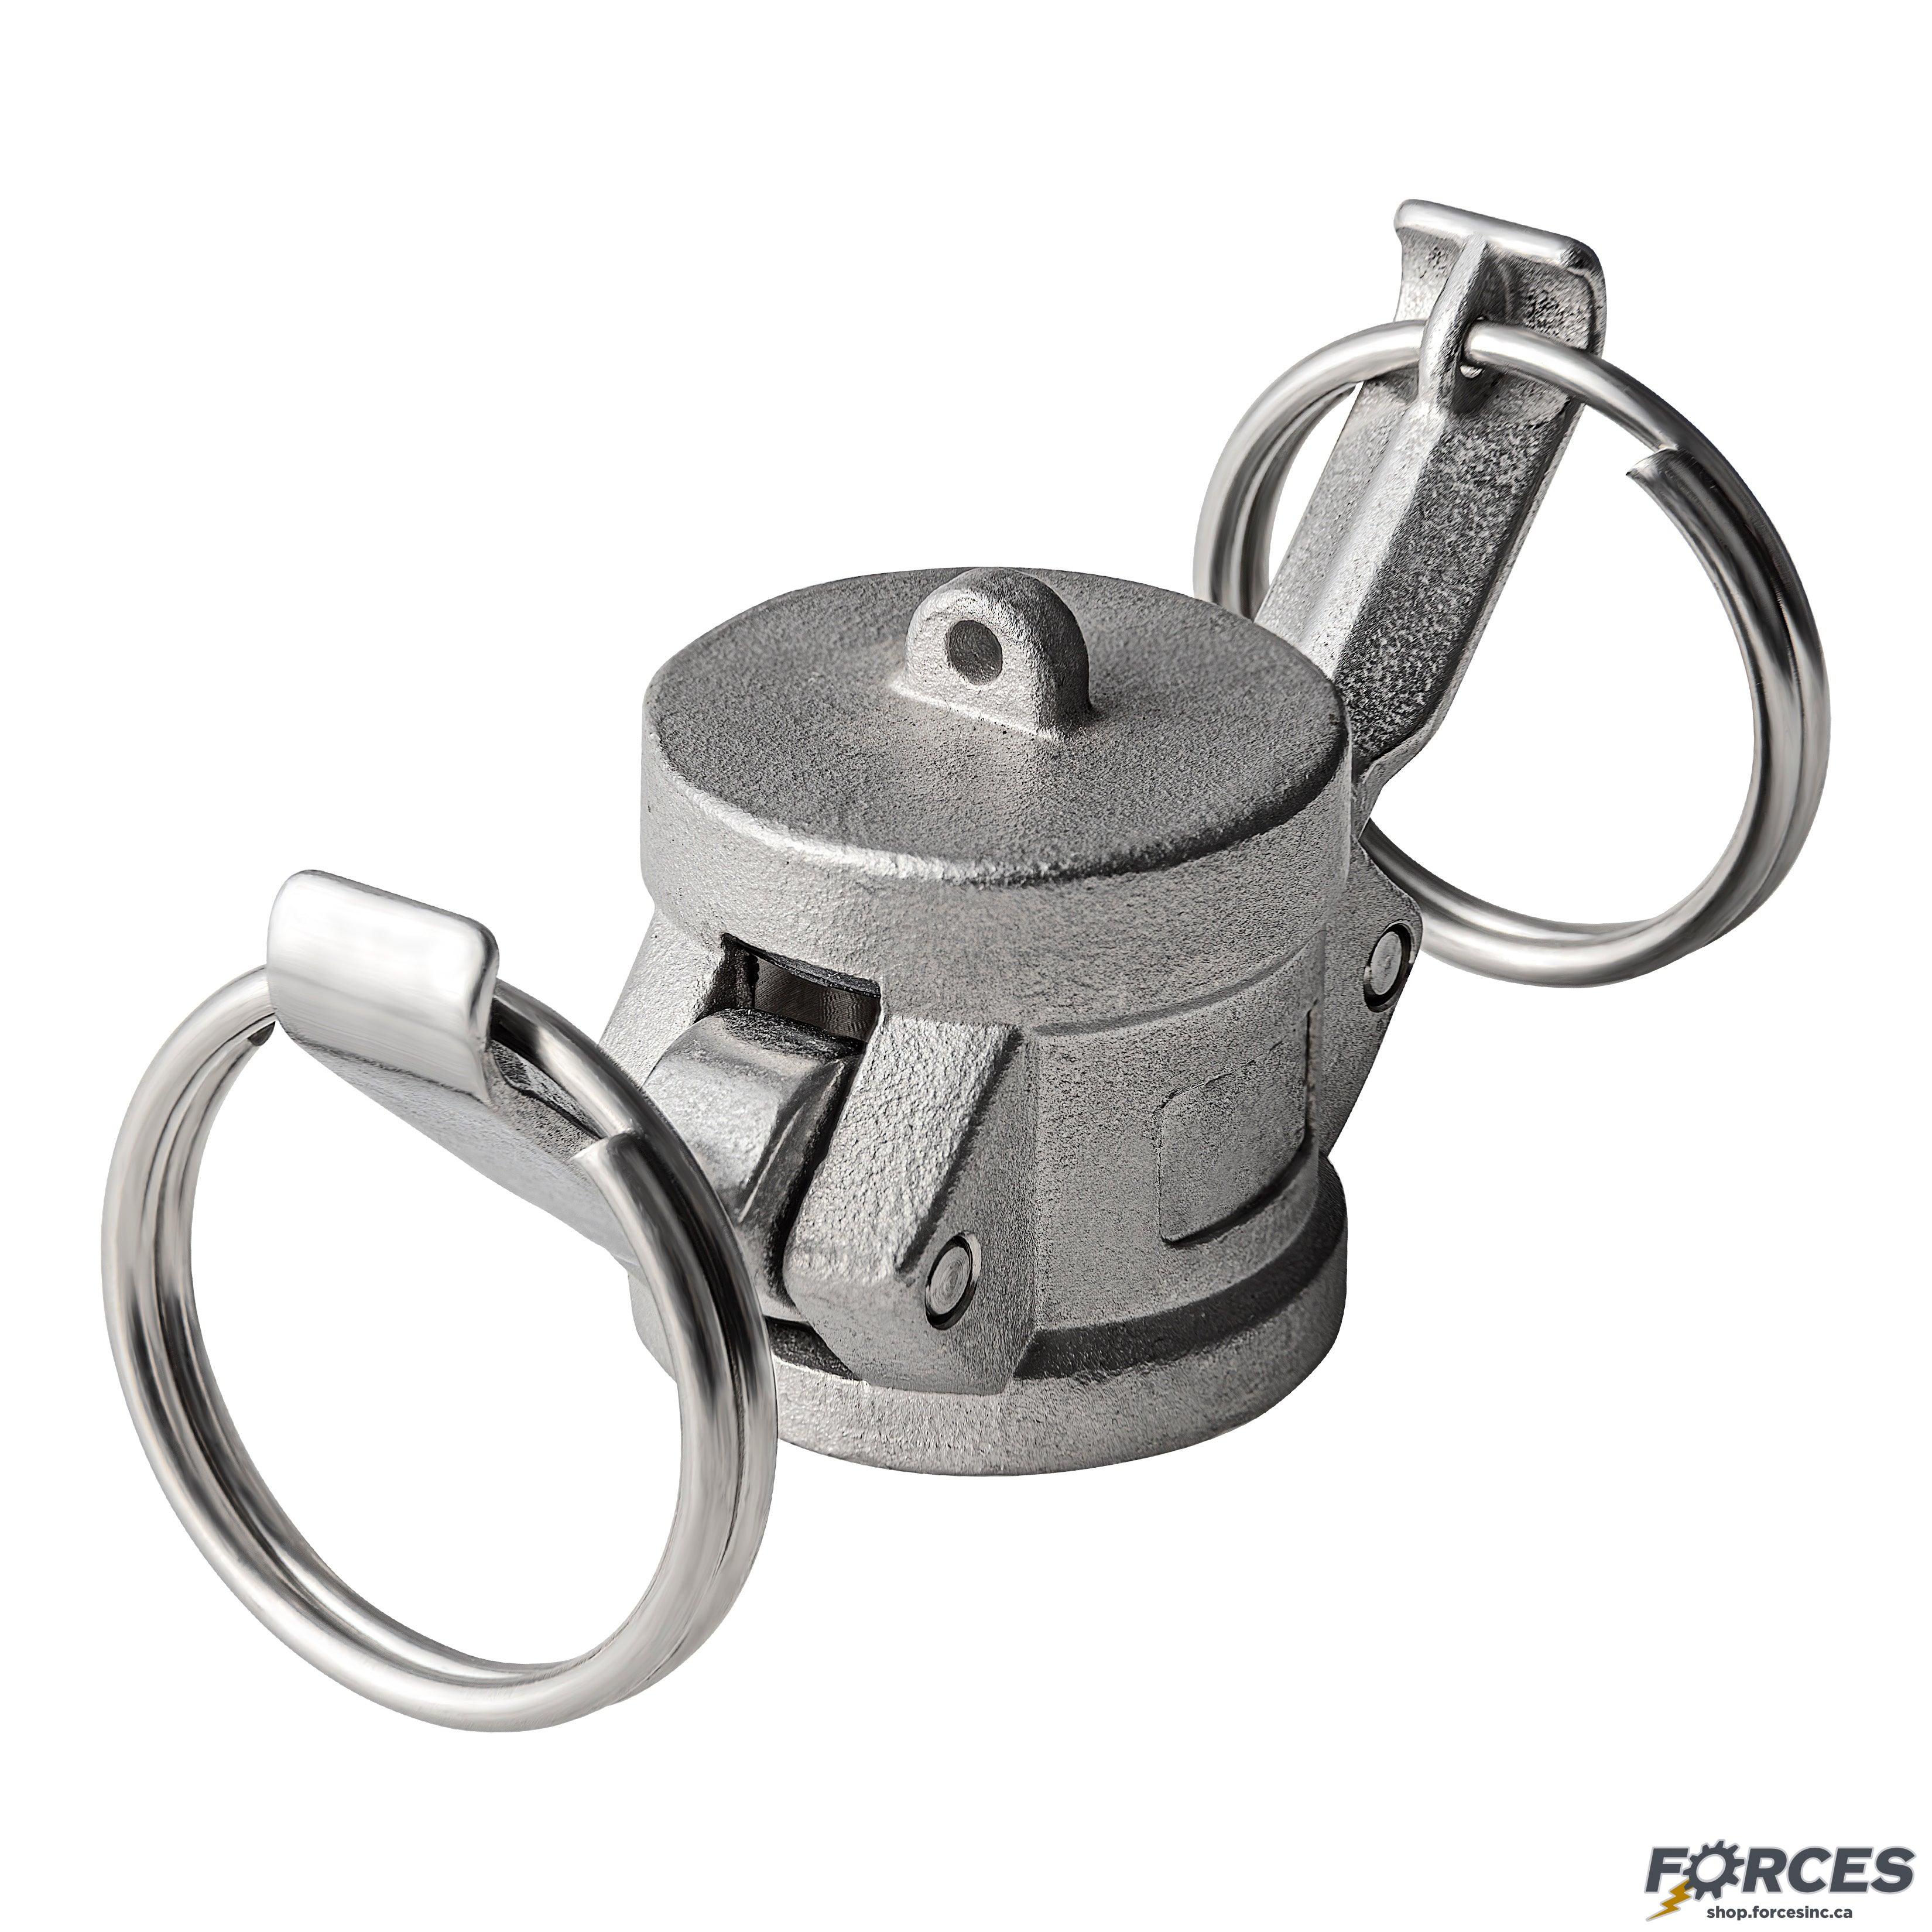 1-1/4" Type DC Camlock Fitting Stainless Steel 316 - Forces Inc